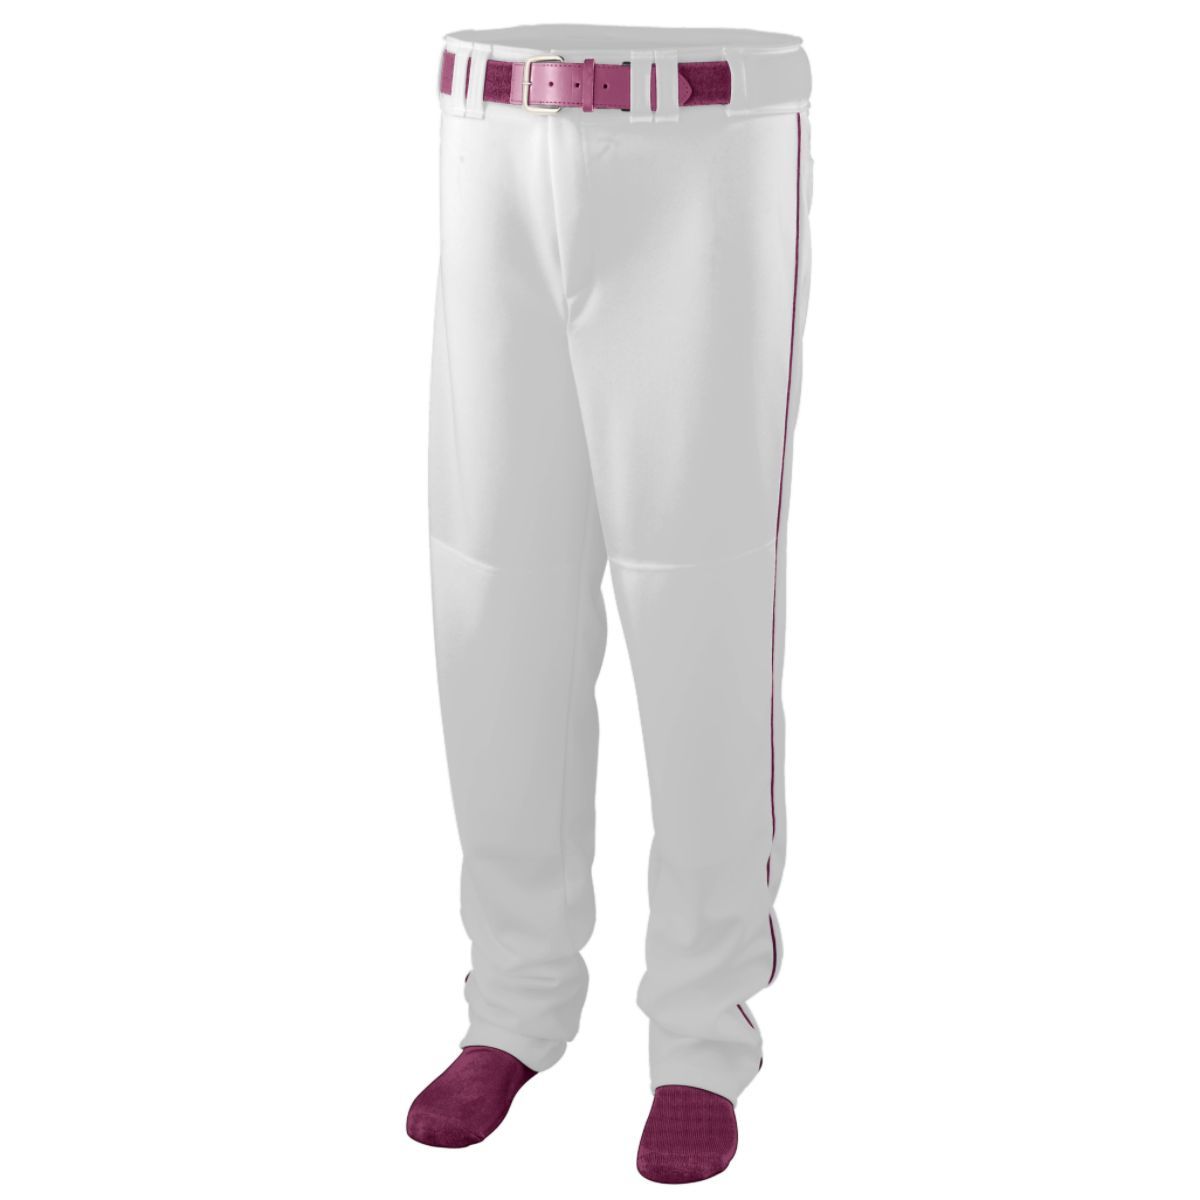 Augusta Sportswear Series Baseball/Softball Pant With Piping in White/Maroon  -Part of the Adult, Adult-Pants, Pants, Augusta-Products, Baseball, All-Sports, All-Sports-1 product lines at KanaleyCreations.com